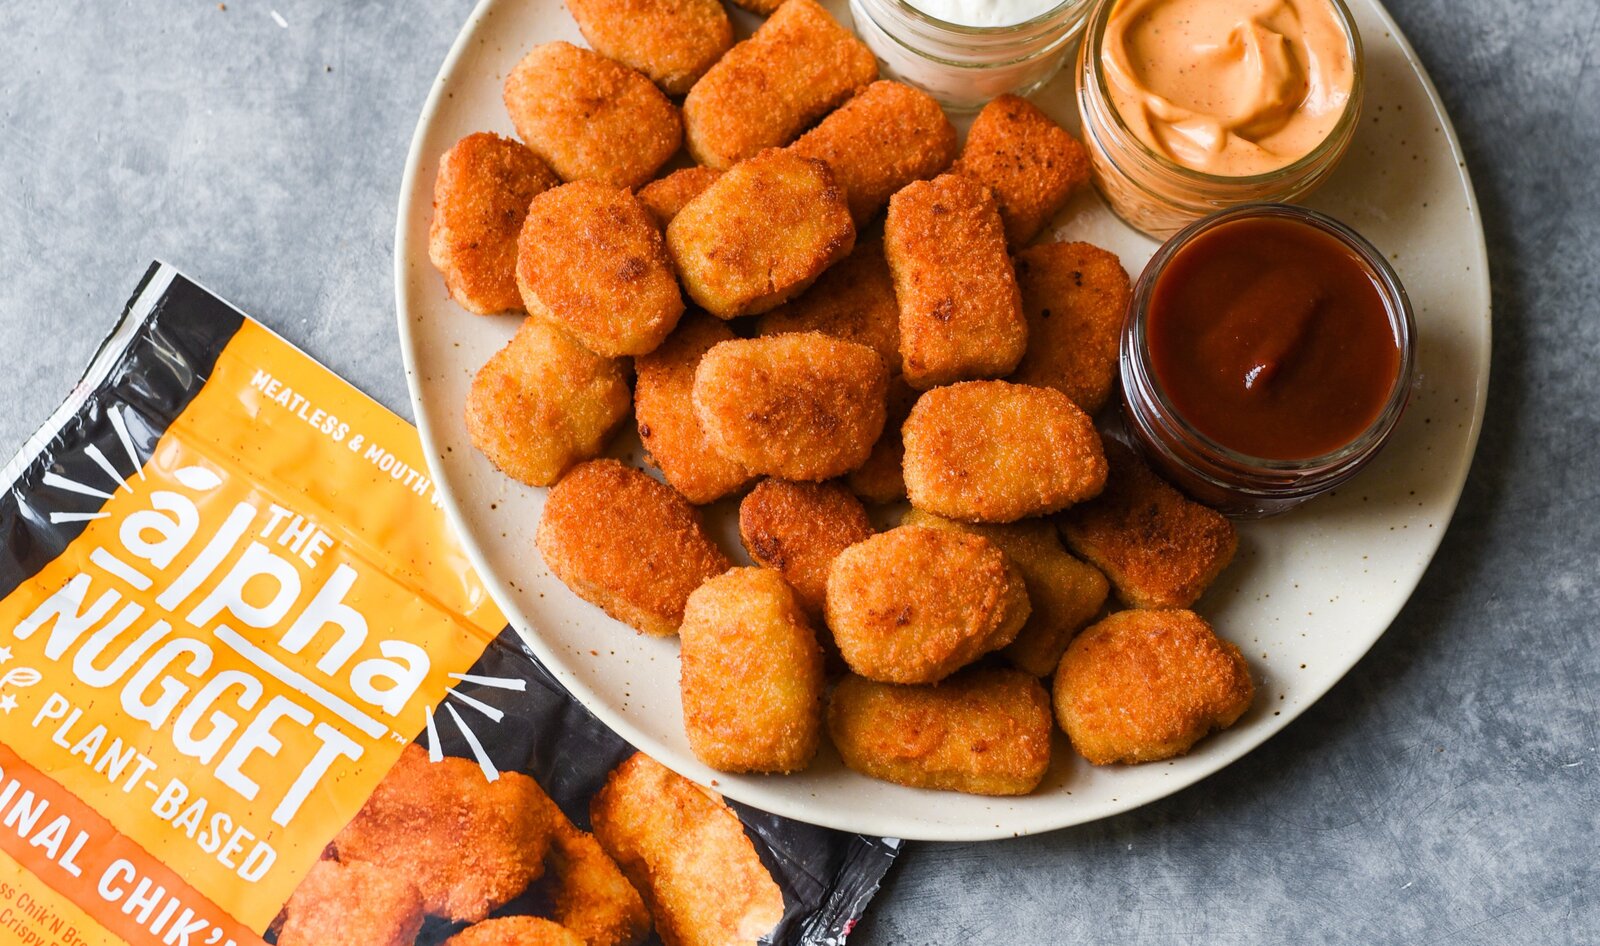 Chicken Prices Are Skyrocketing. So Alpha Foods Just Made Its Vegan Nuggets Cheaper.&nbsp;